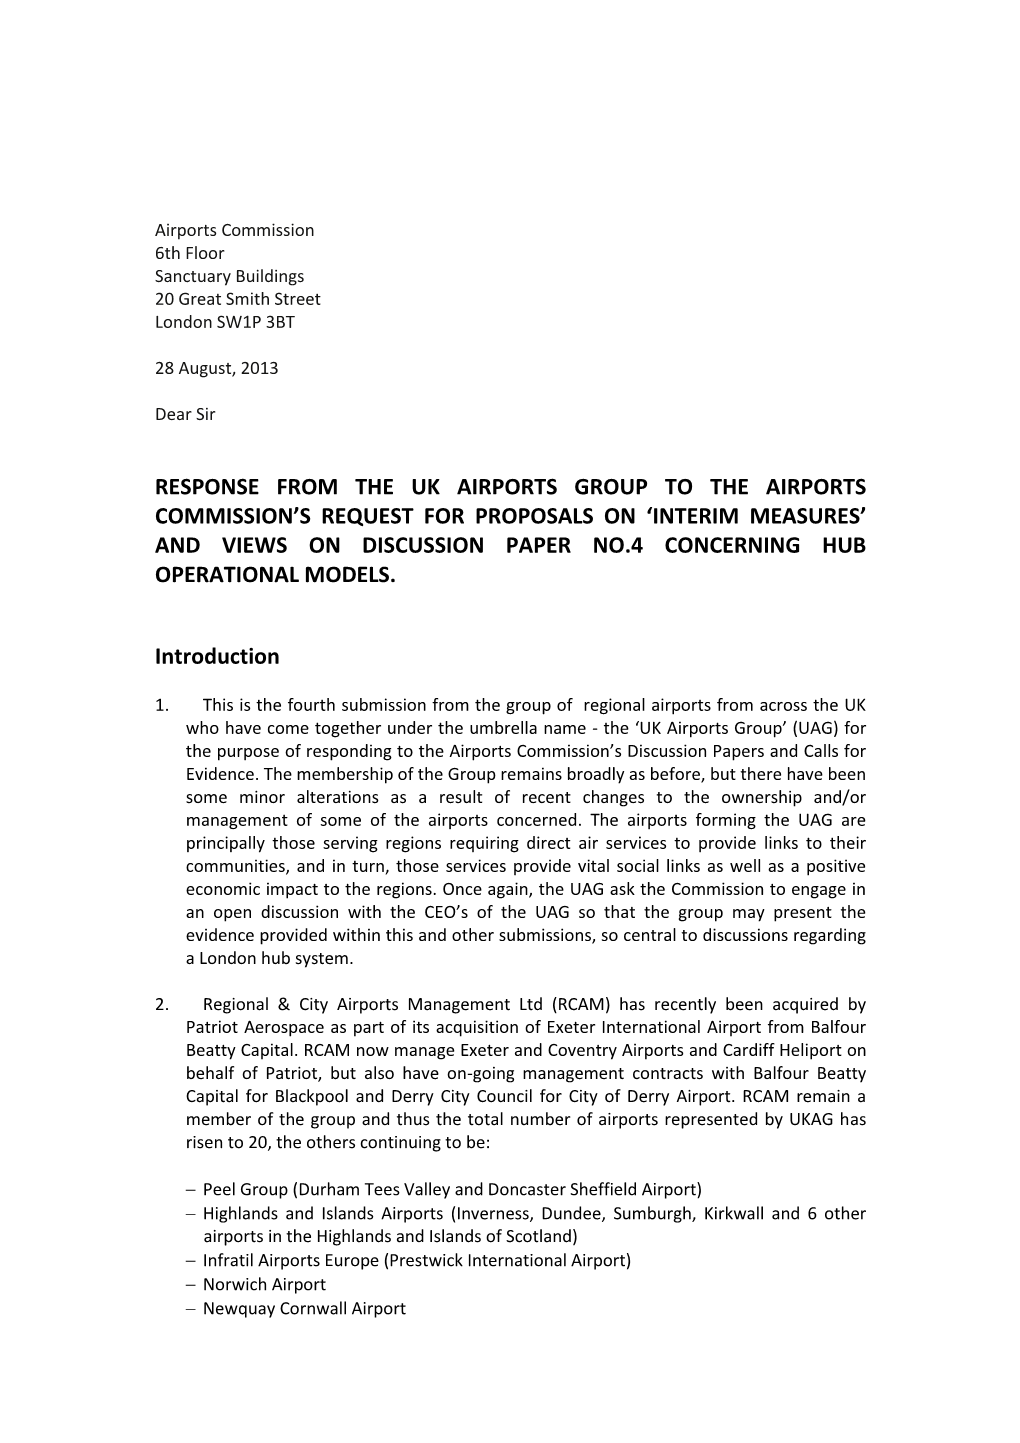 Airports Commission UAG Submission on Discussion Paper 4